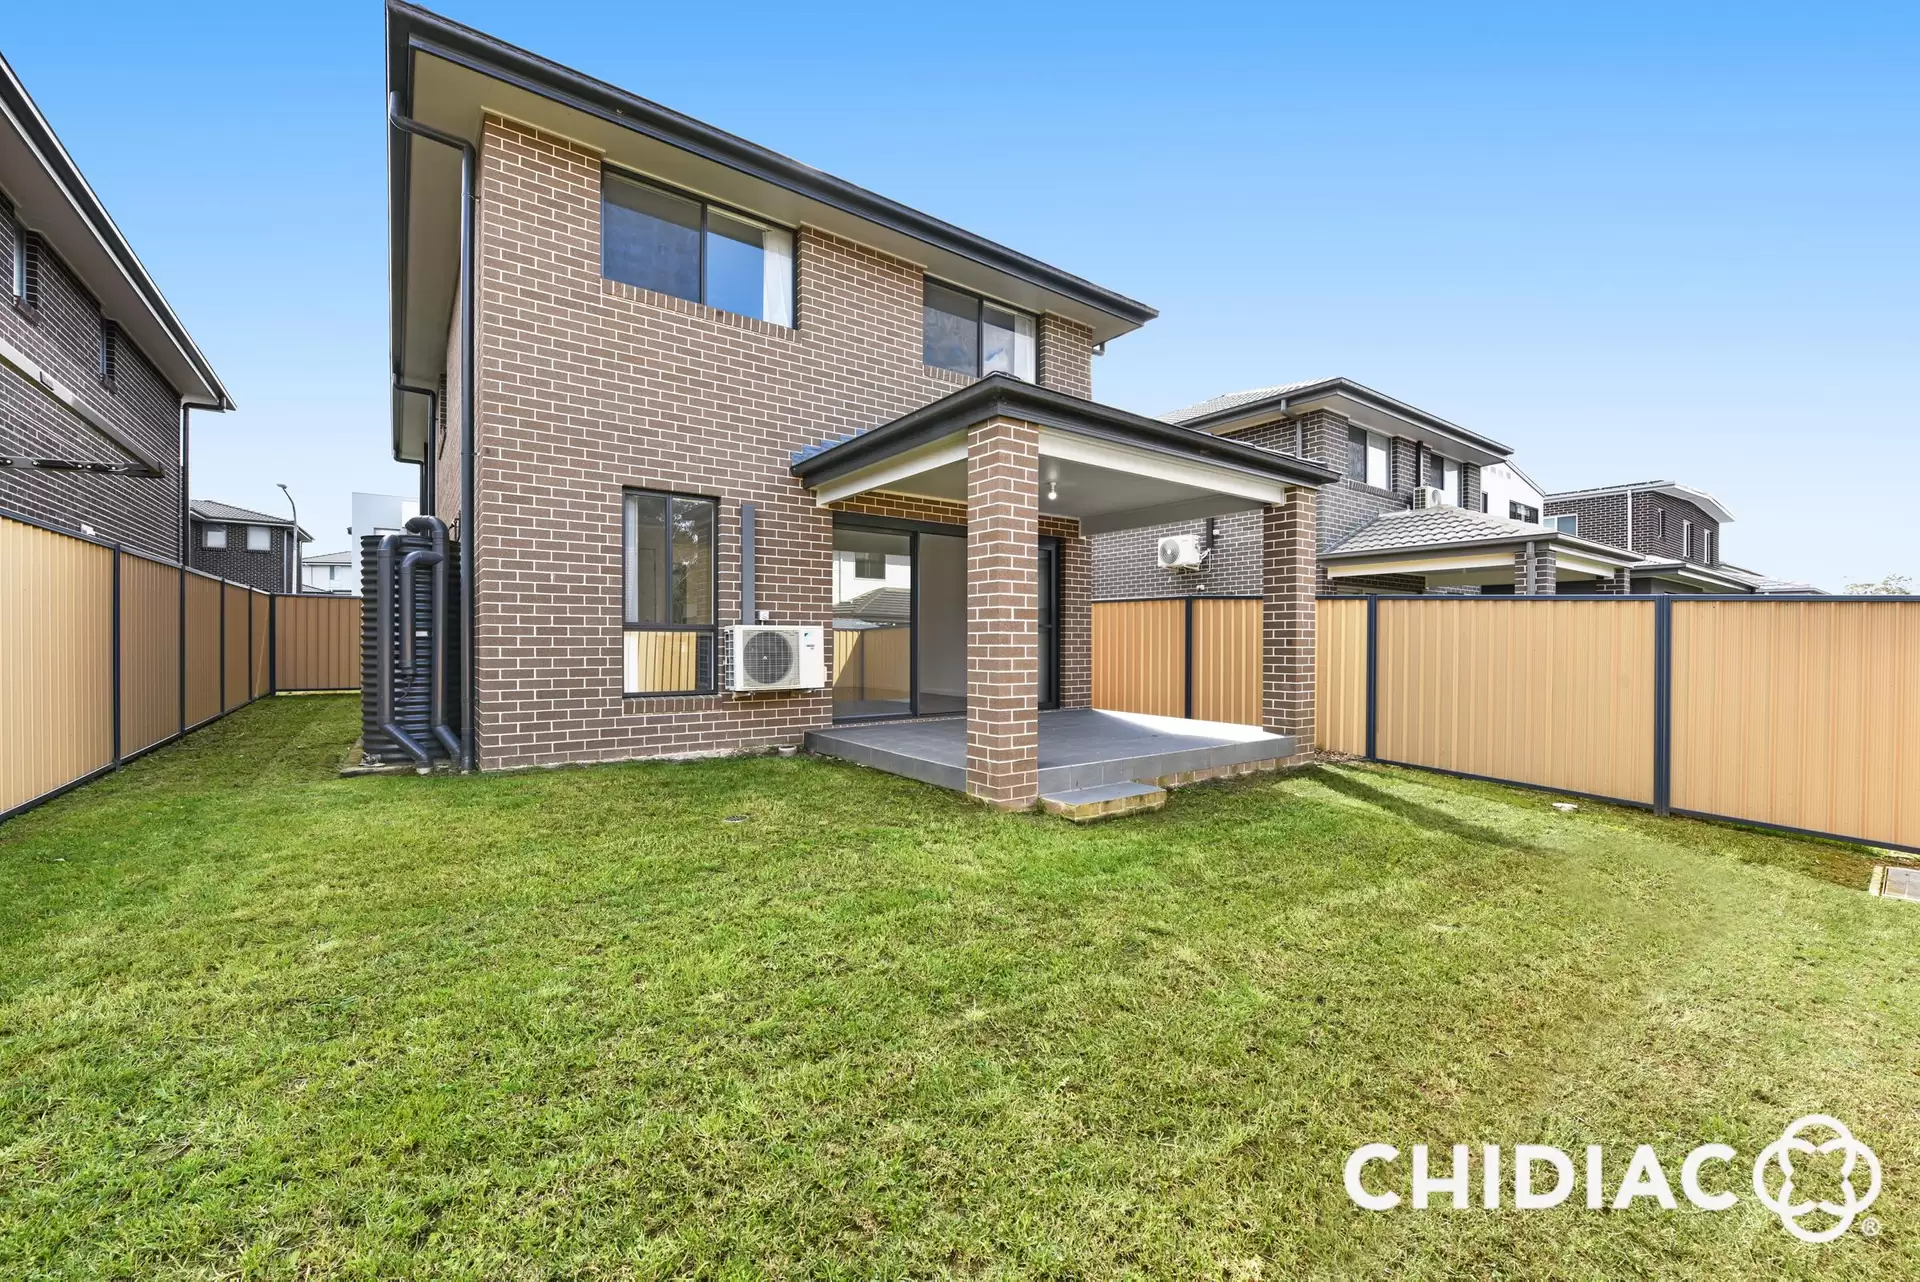 33 Changsha Road, Edmondson Park Leased by Chidiac Realty - image 1